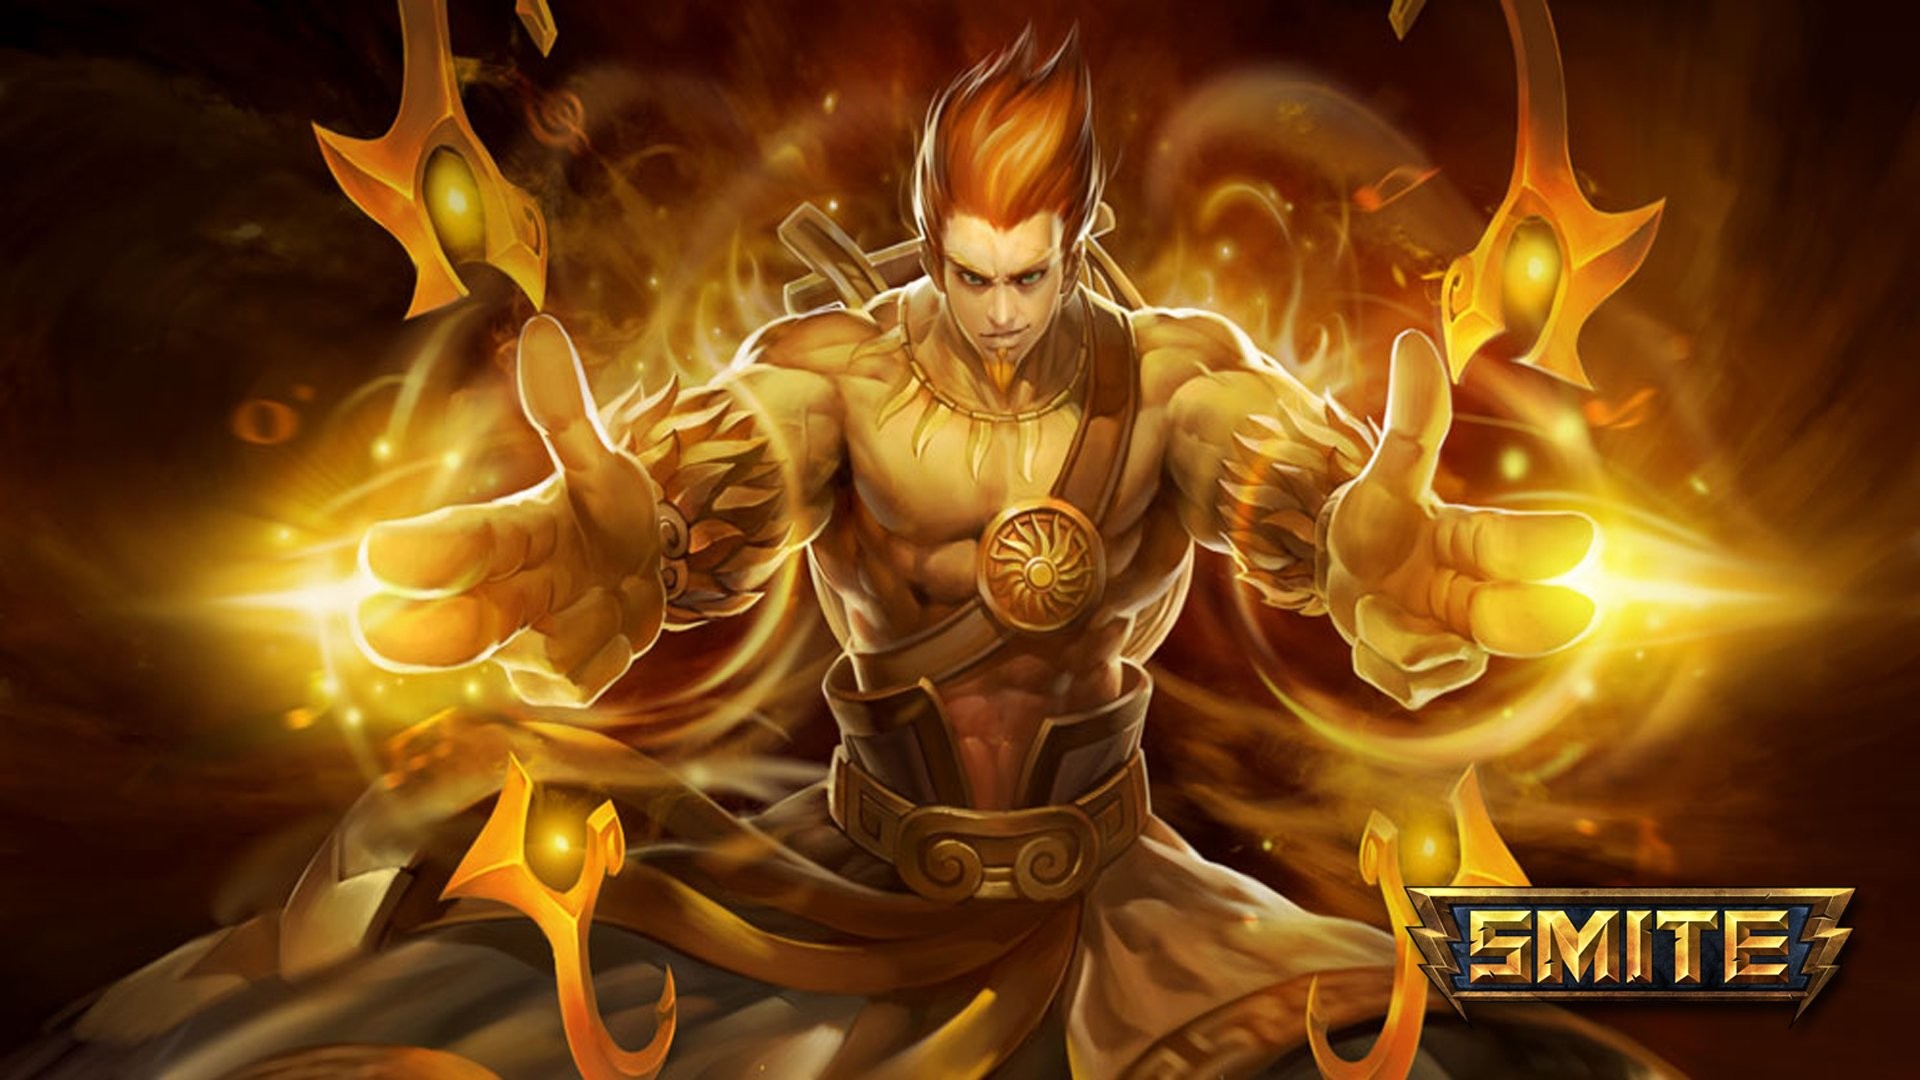 1920x1080 Smite wallpaper images on